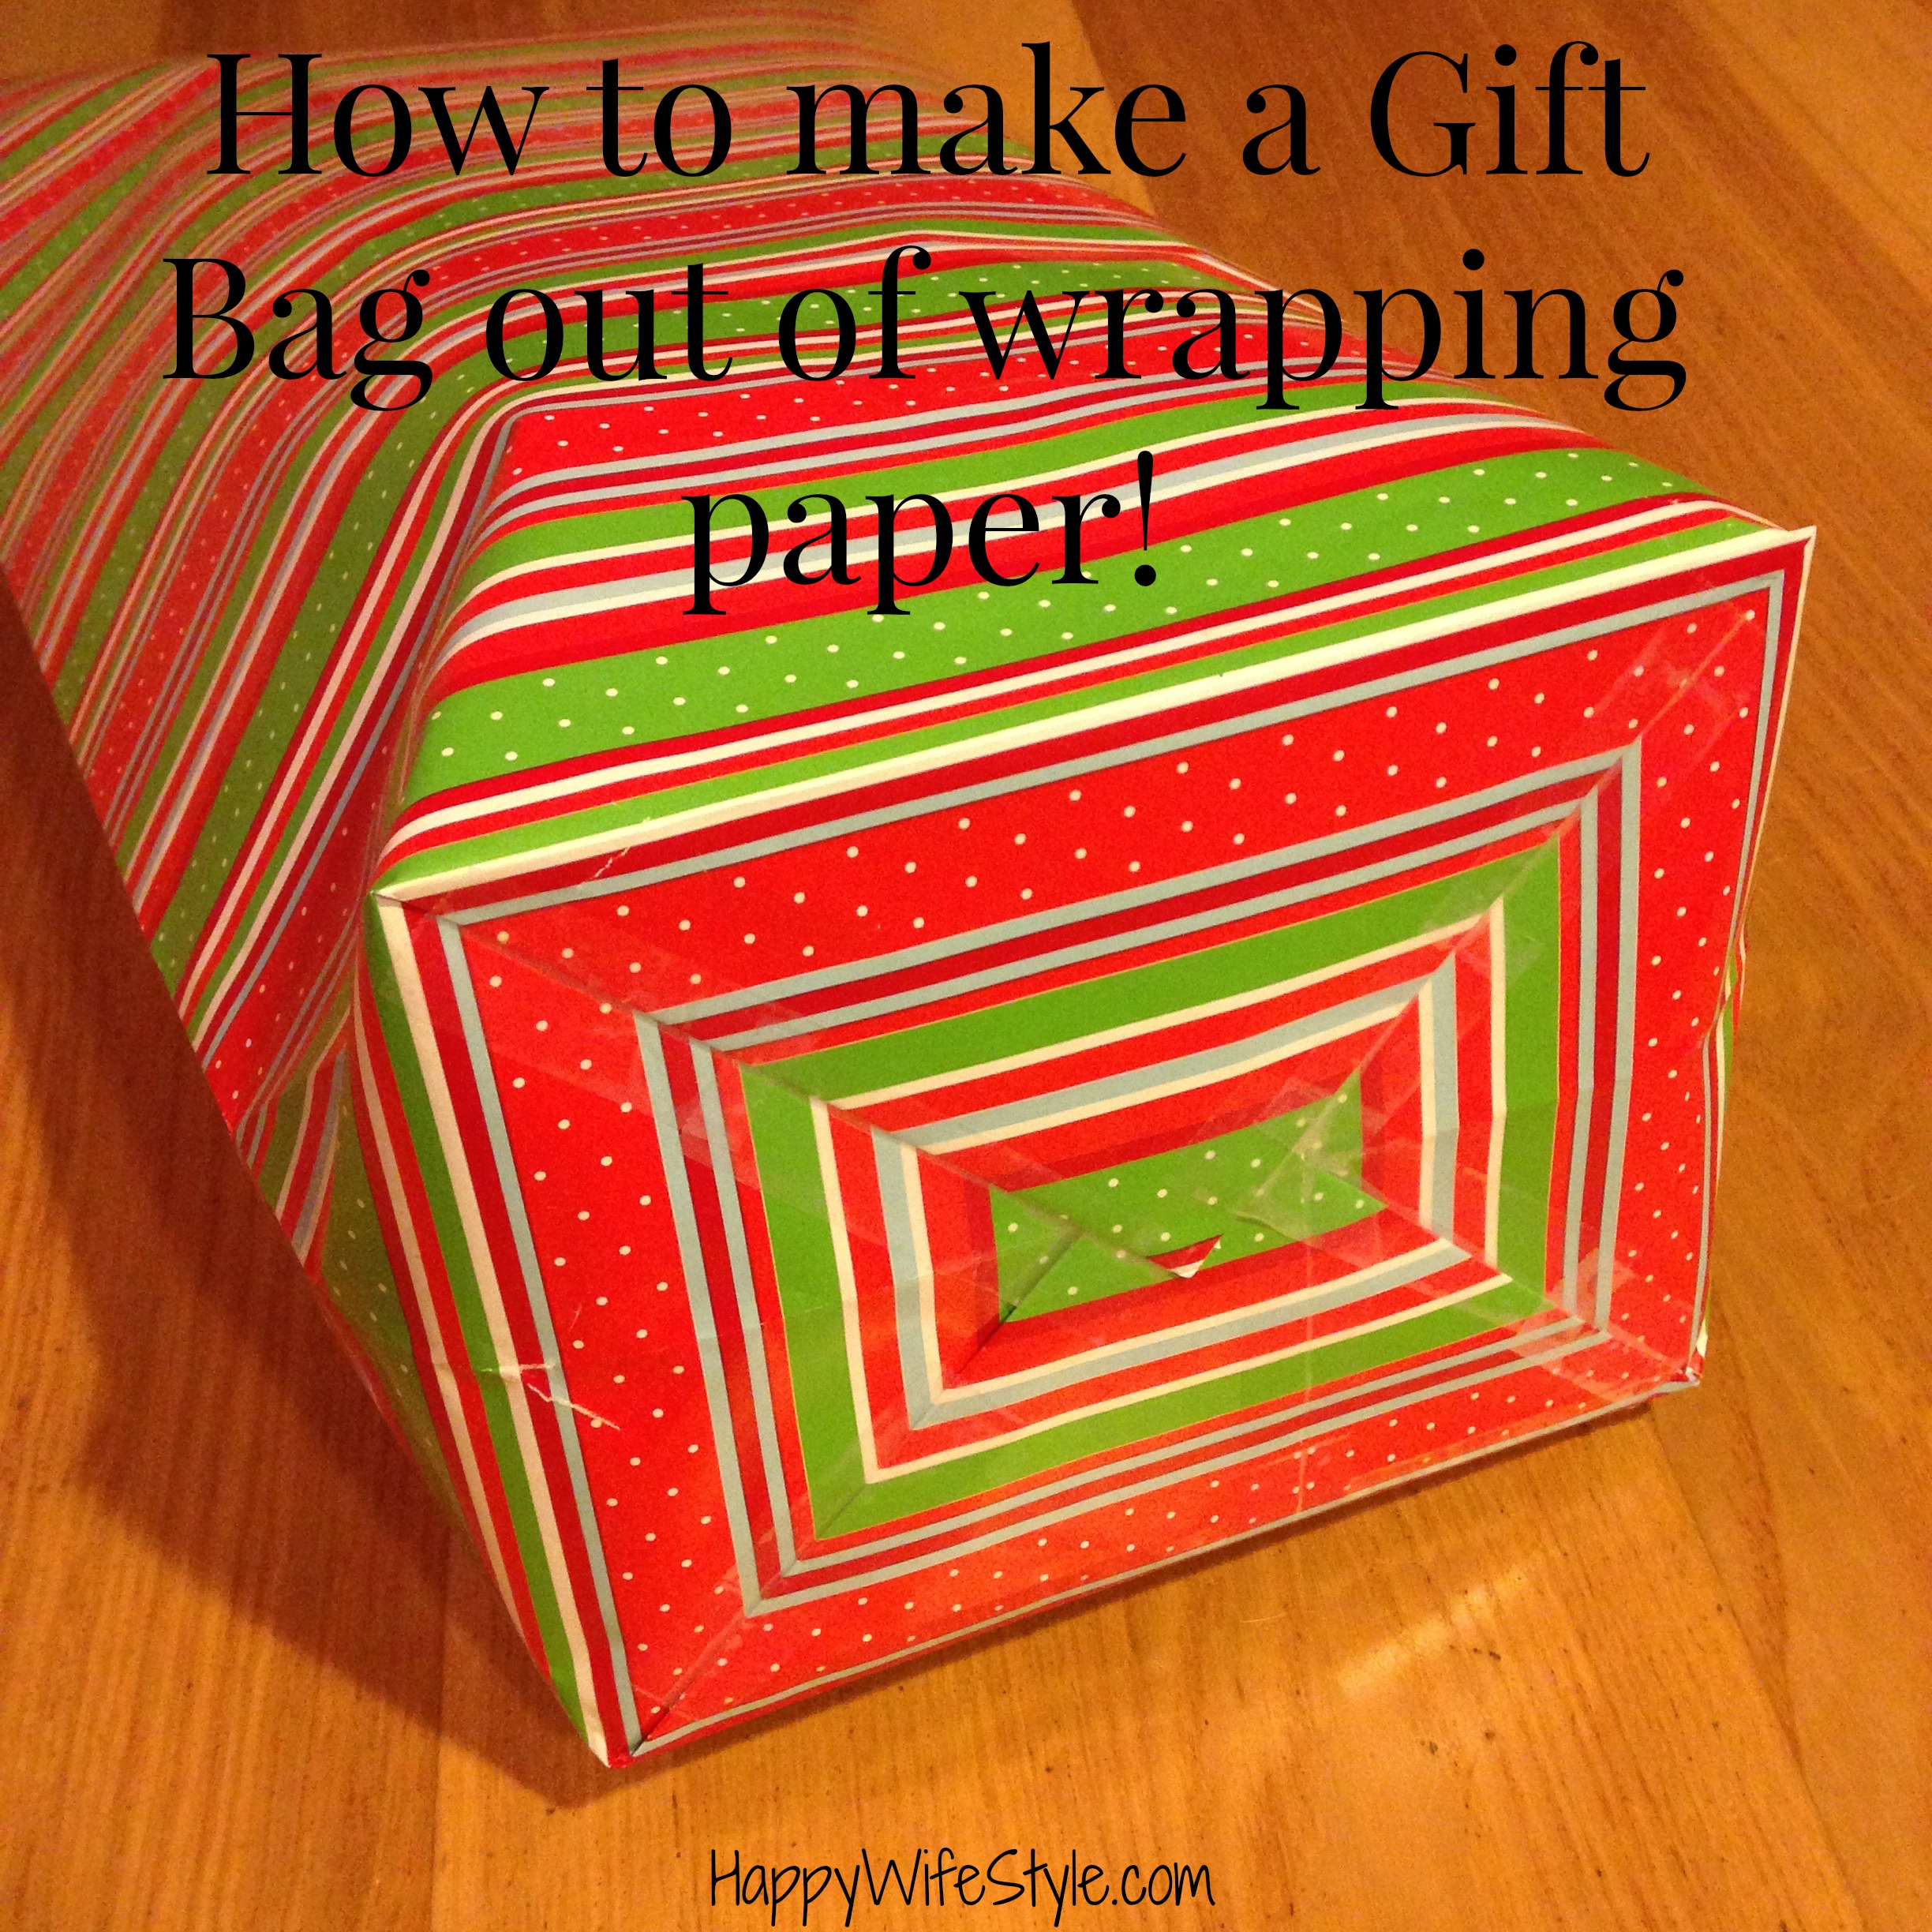 How to make a gift bag out of wrapping paper! — Happy WifeStyle™